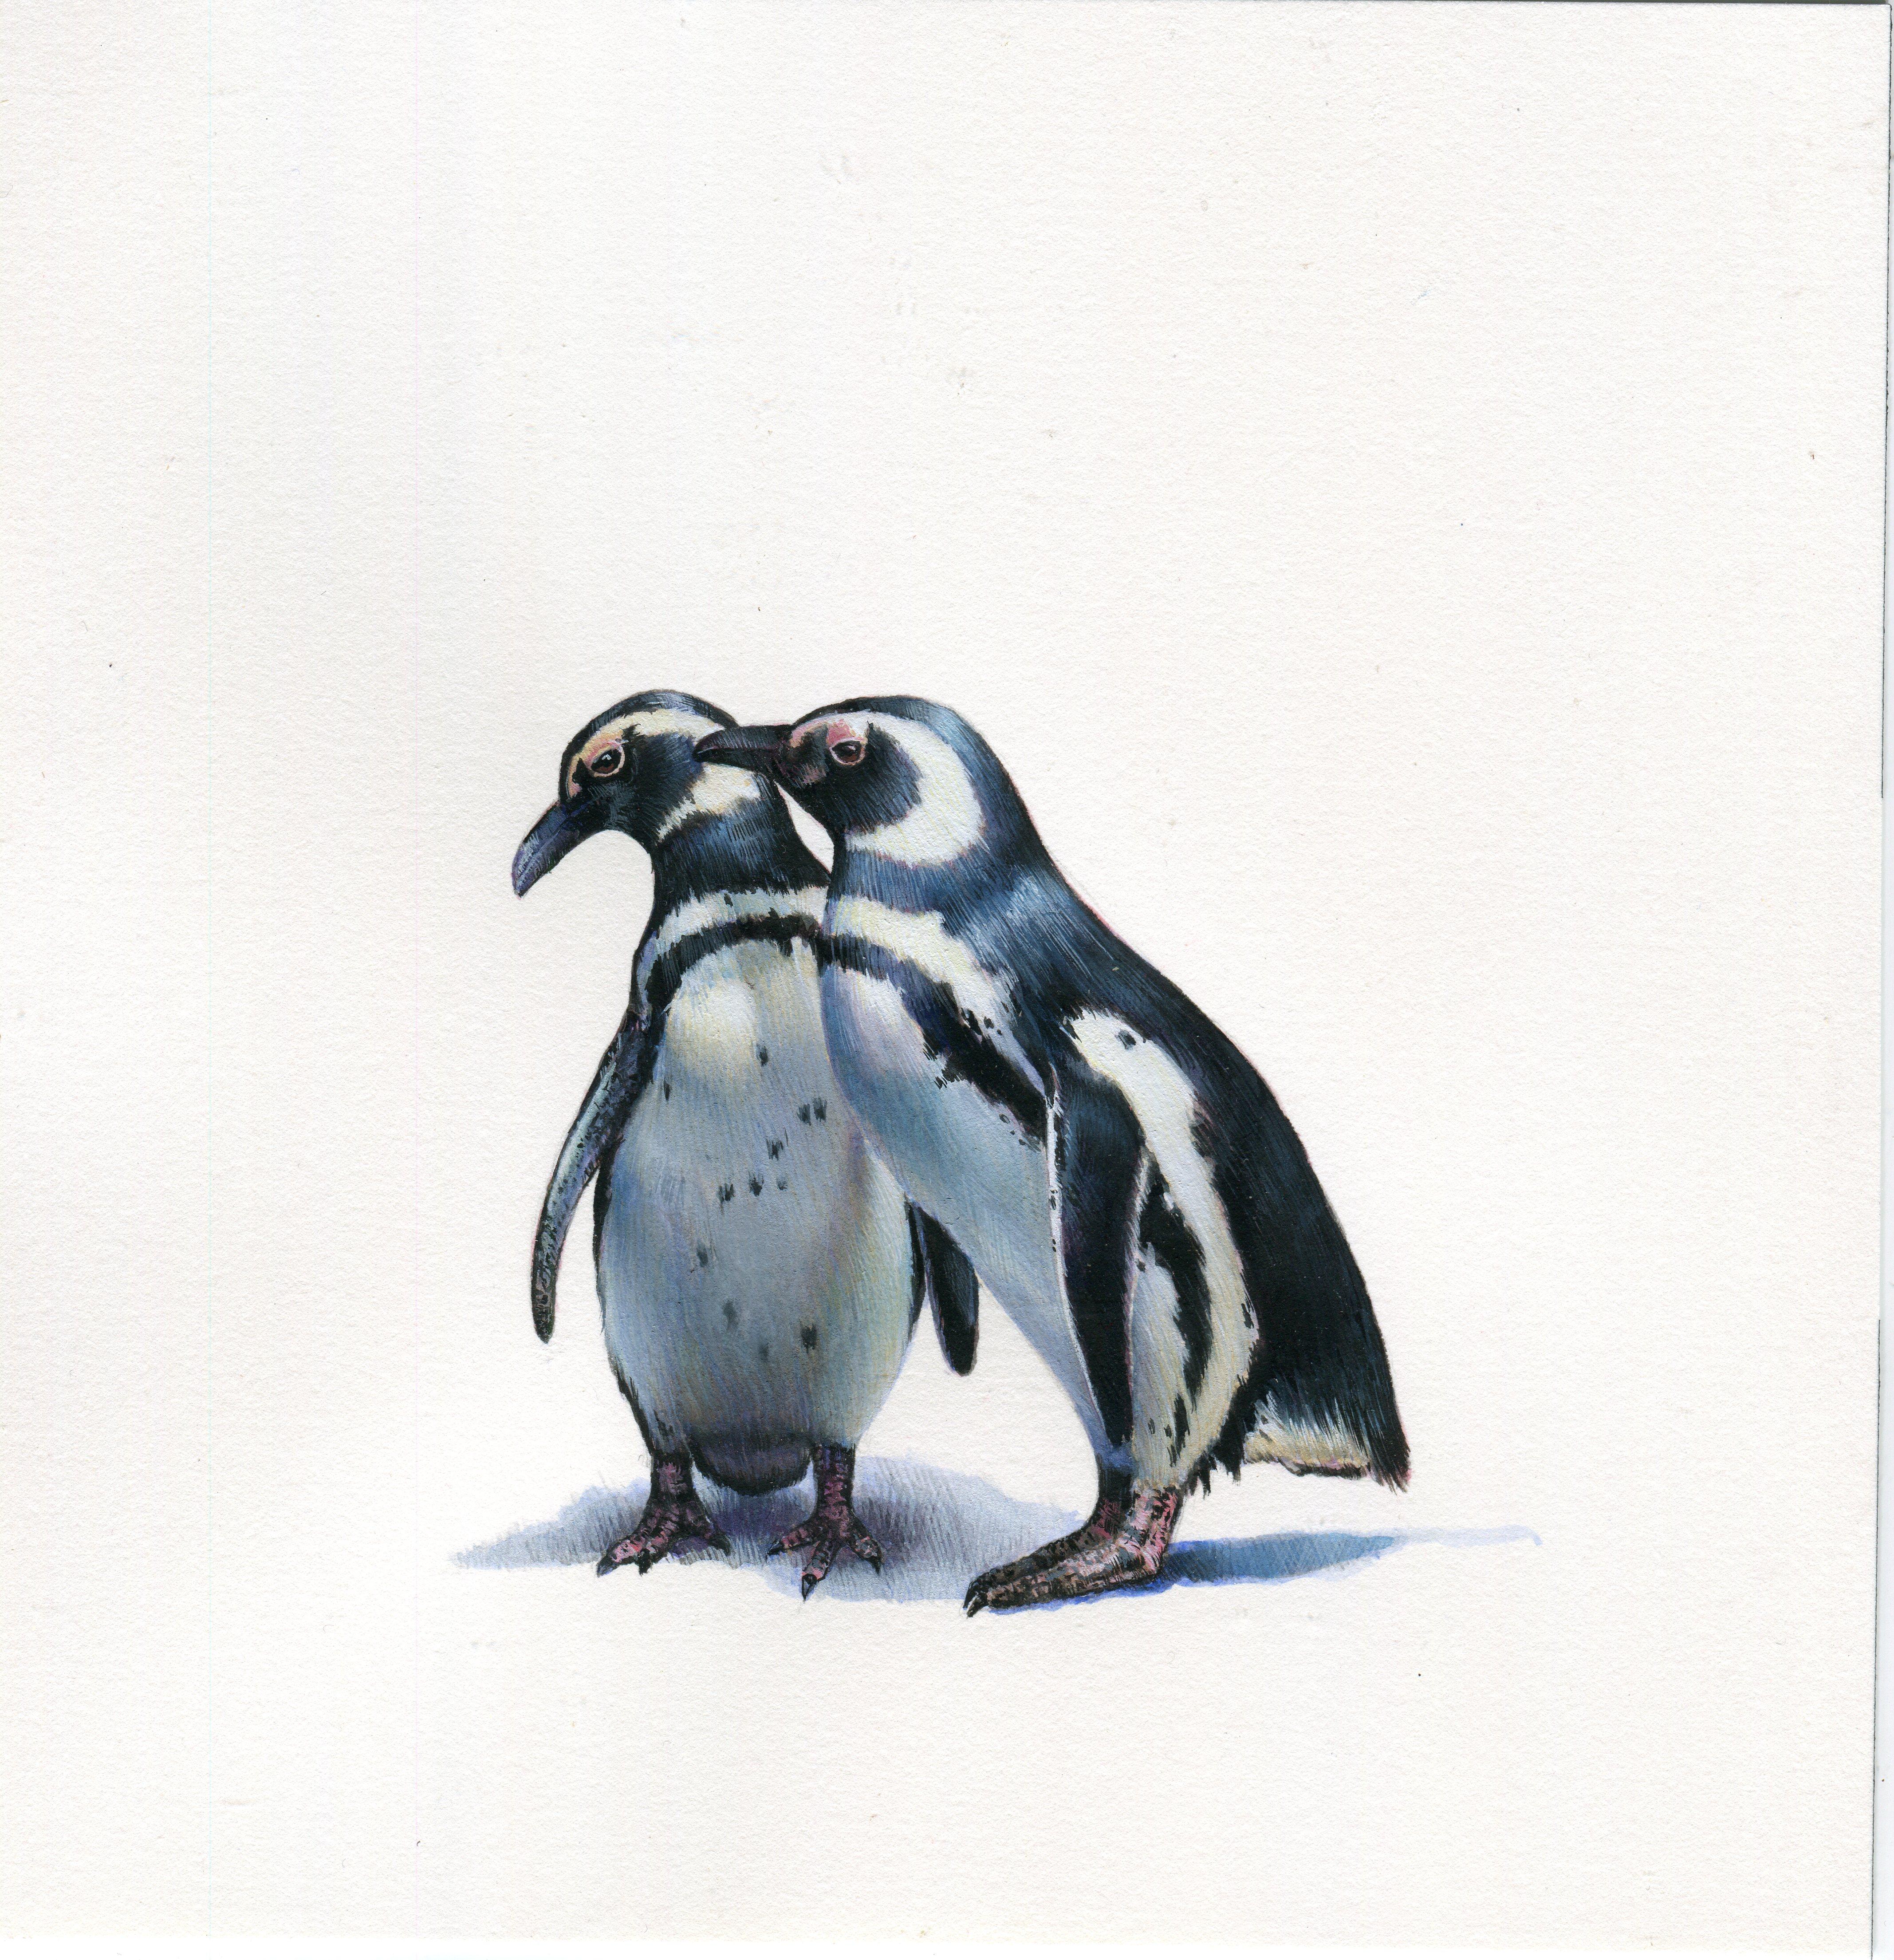 Dina Brodsky Animal Art - Two Penguins, contemporary realist animal watercolor on paper